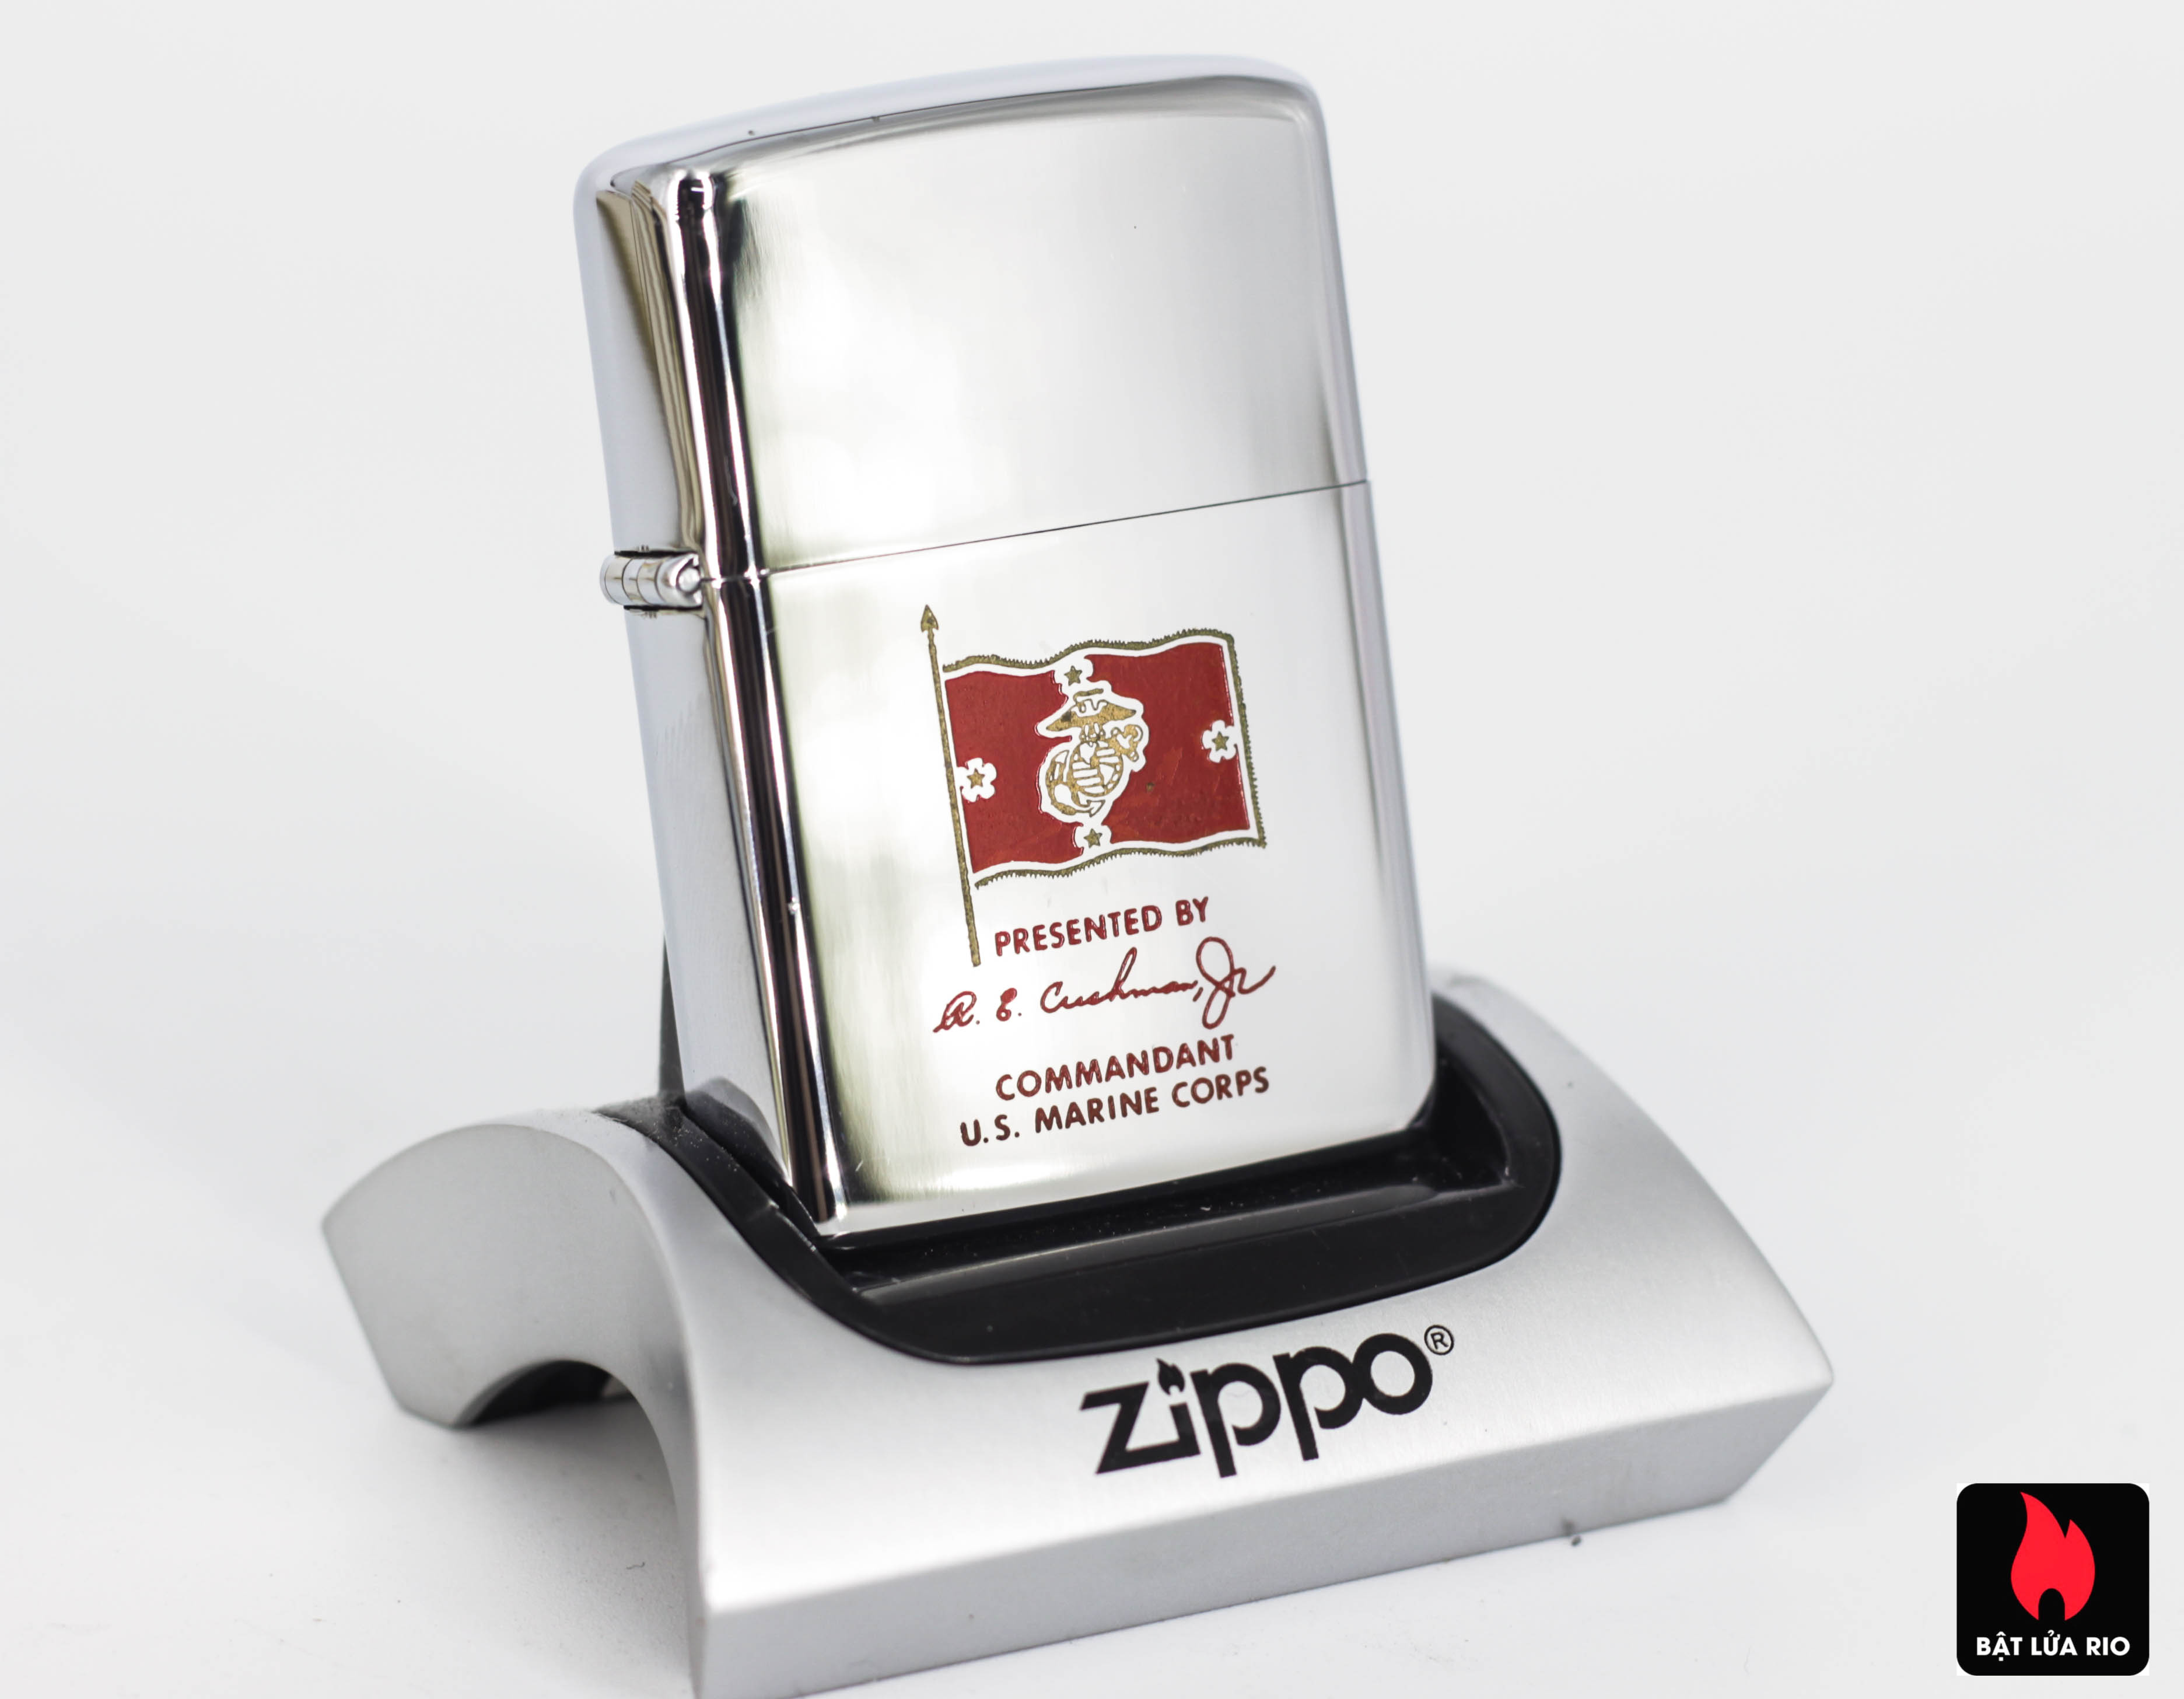 ZIPPO XƯA 1971 – PRESENTED BY COMMANDANT US MARINE CORPS